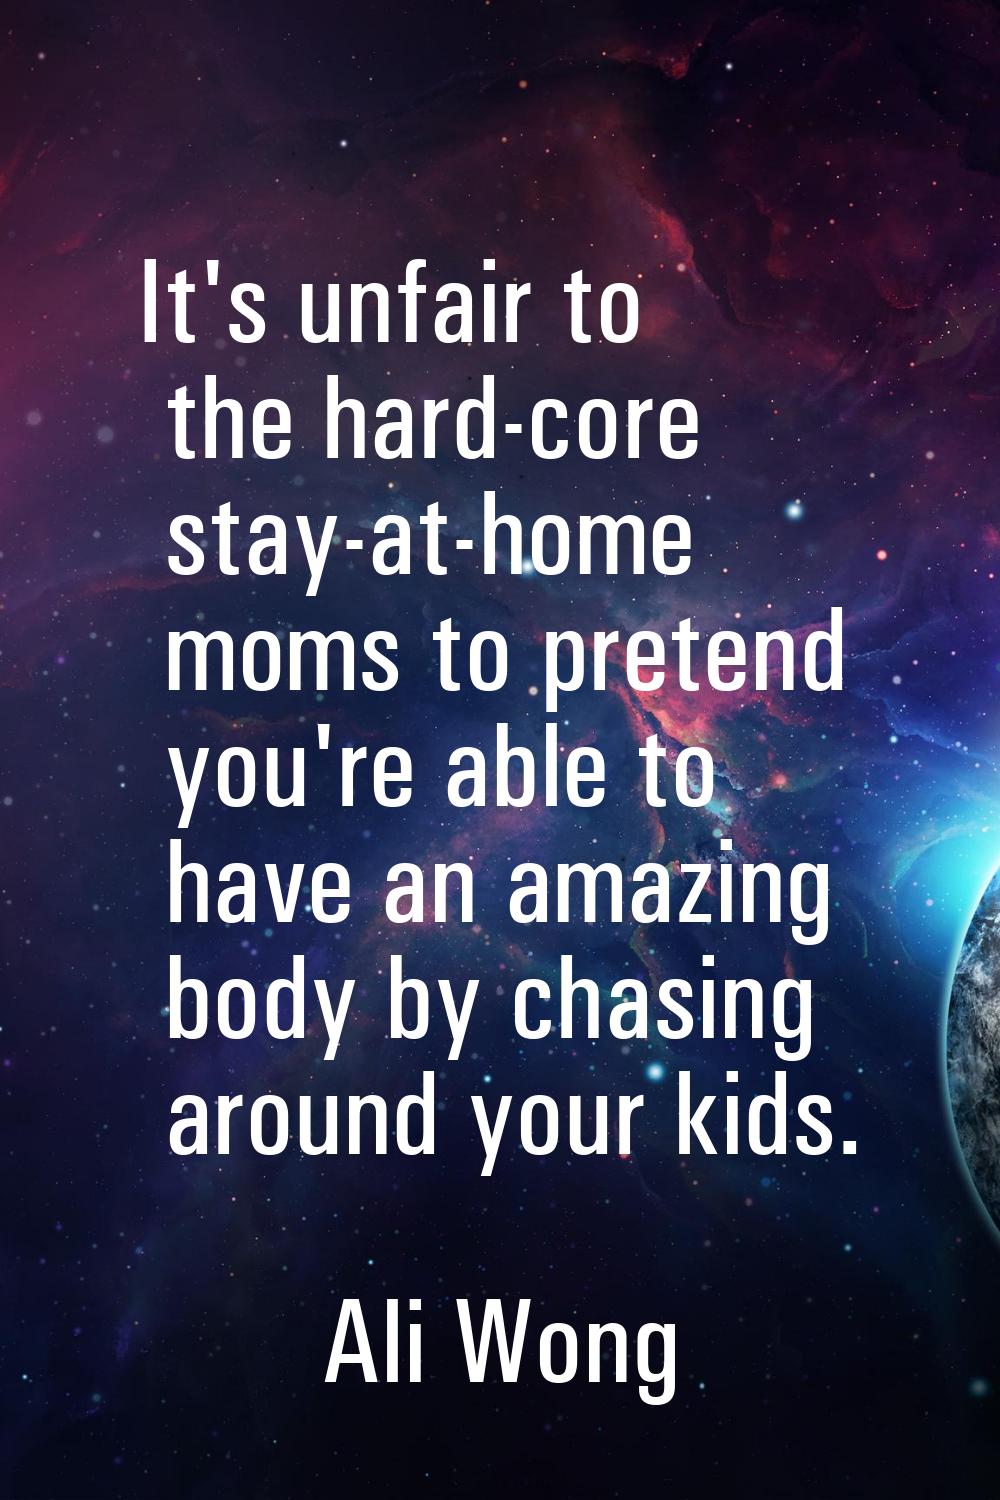 It's unfair to the hard-core stay-at-home moms to pretend you're able to have an amazing body by ch